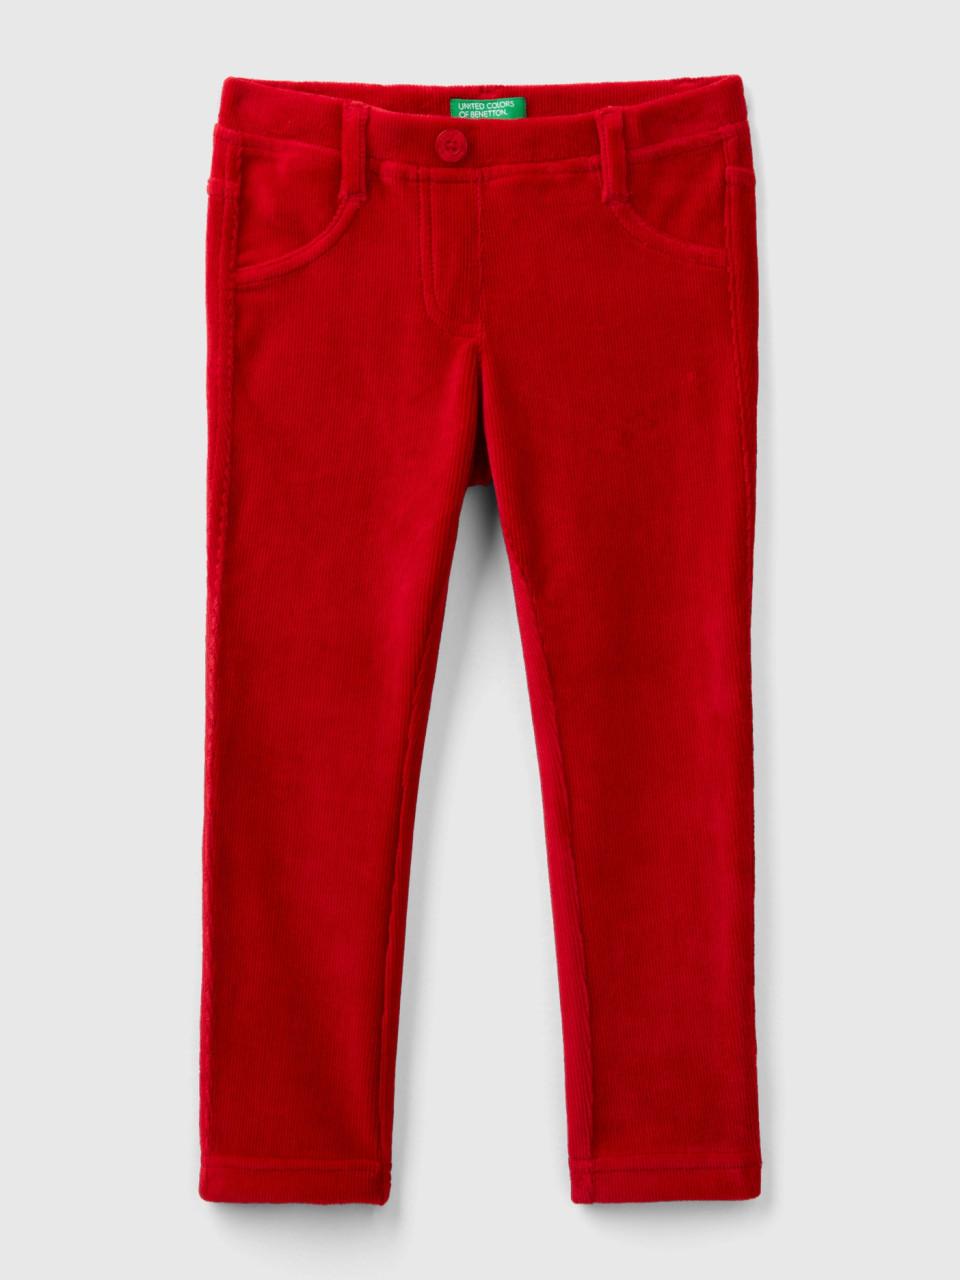 Benetton, Ribbed Chenille Trousers, Red, Kids